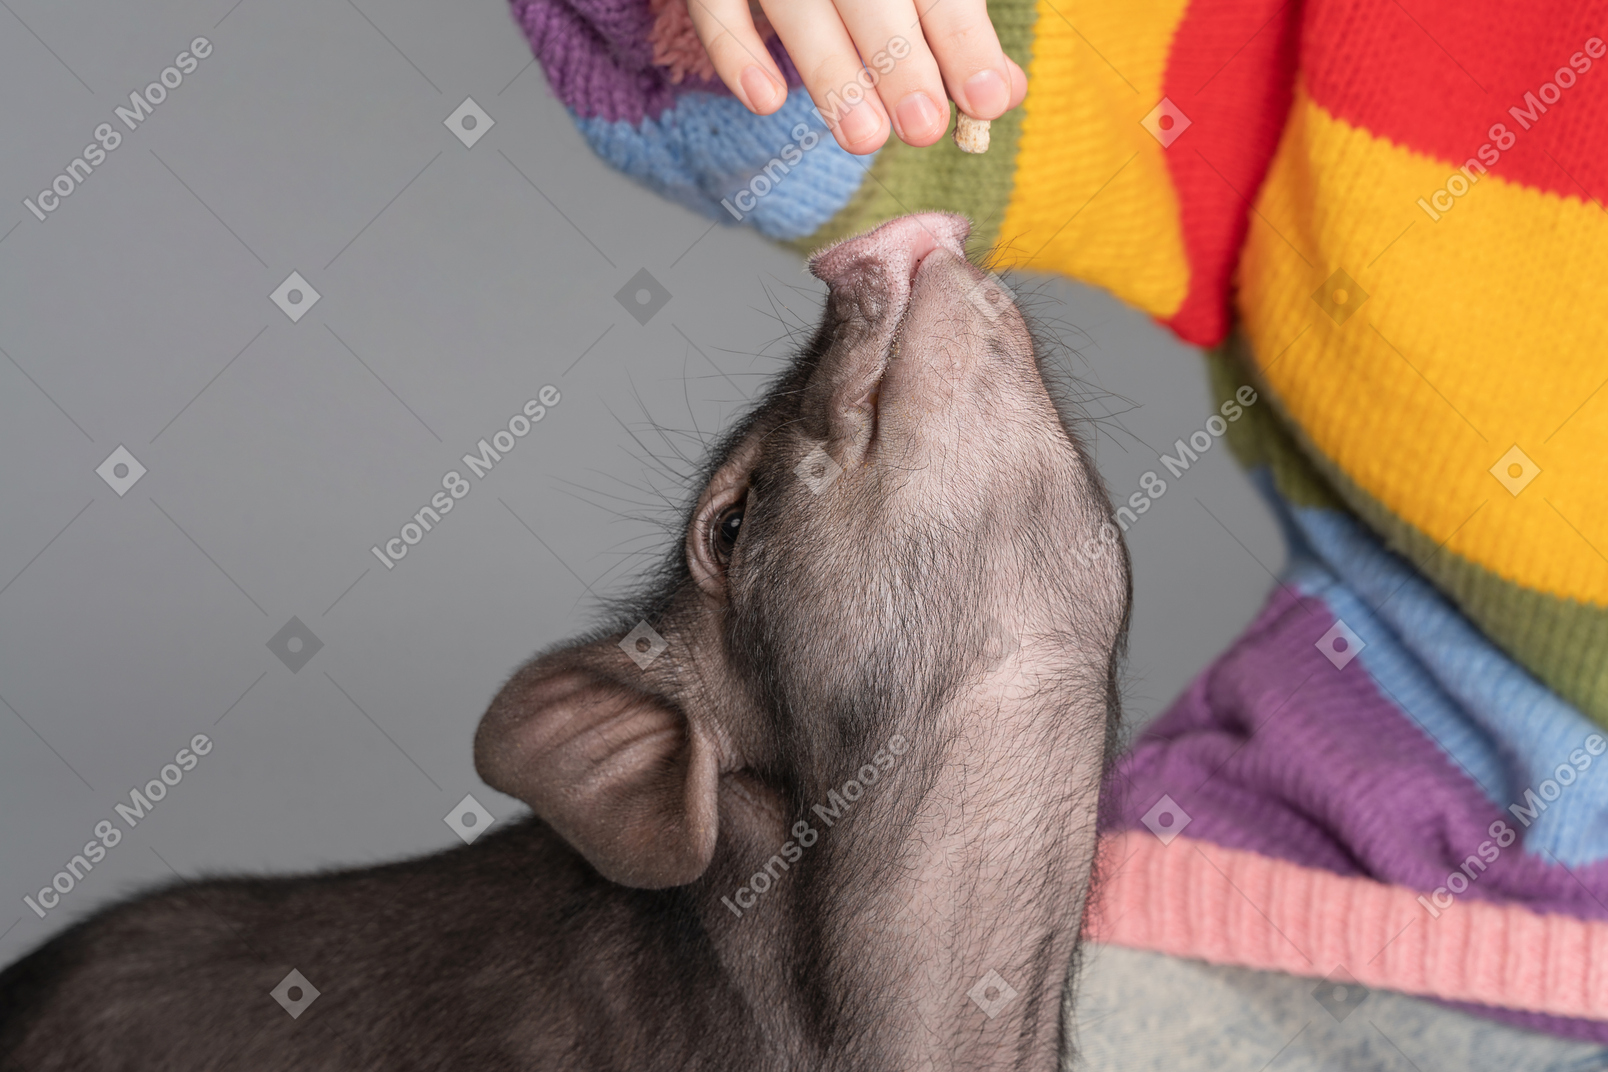 A woman feeding a tiny pet pig from her hands